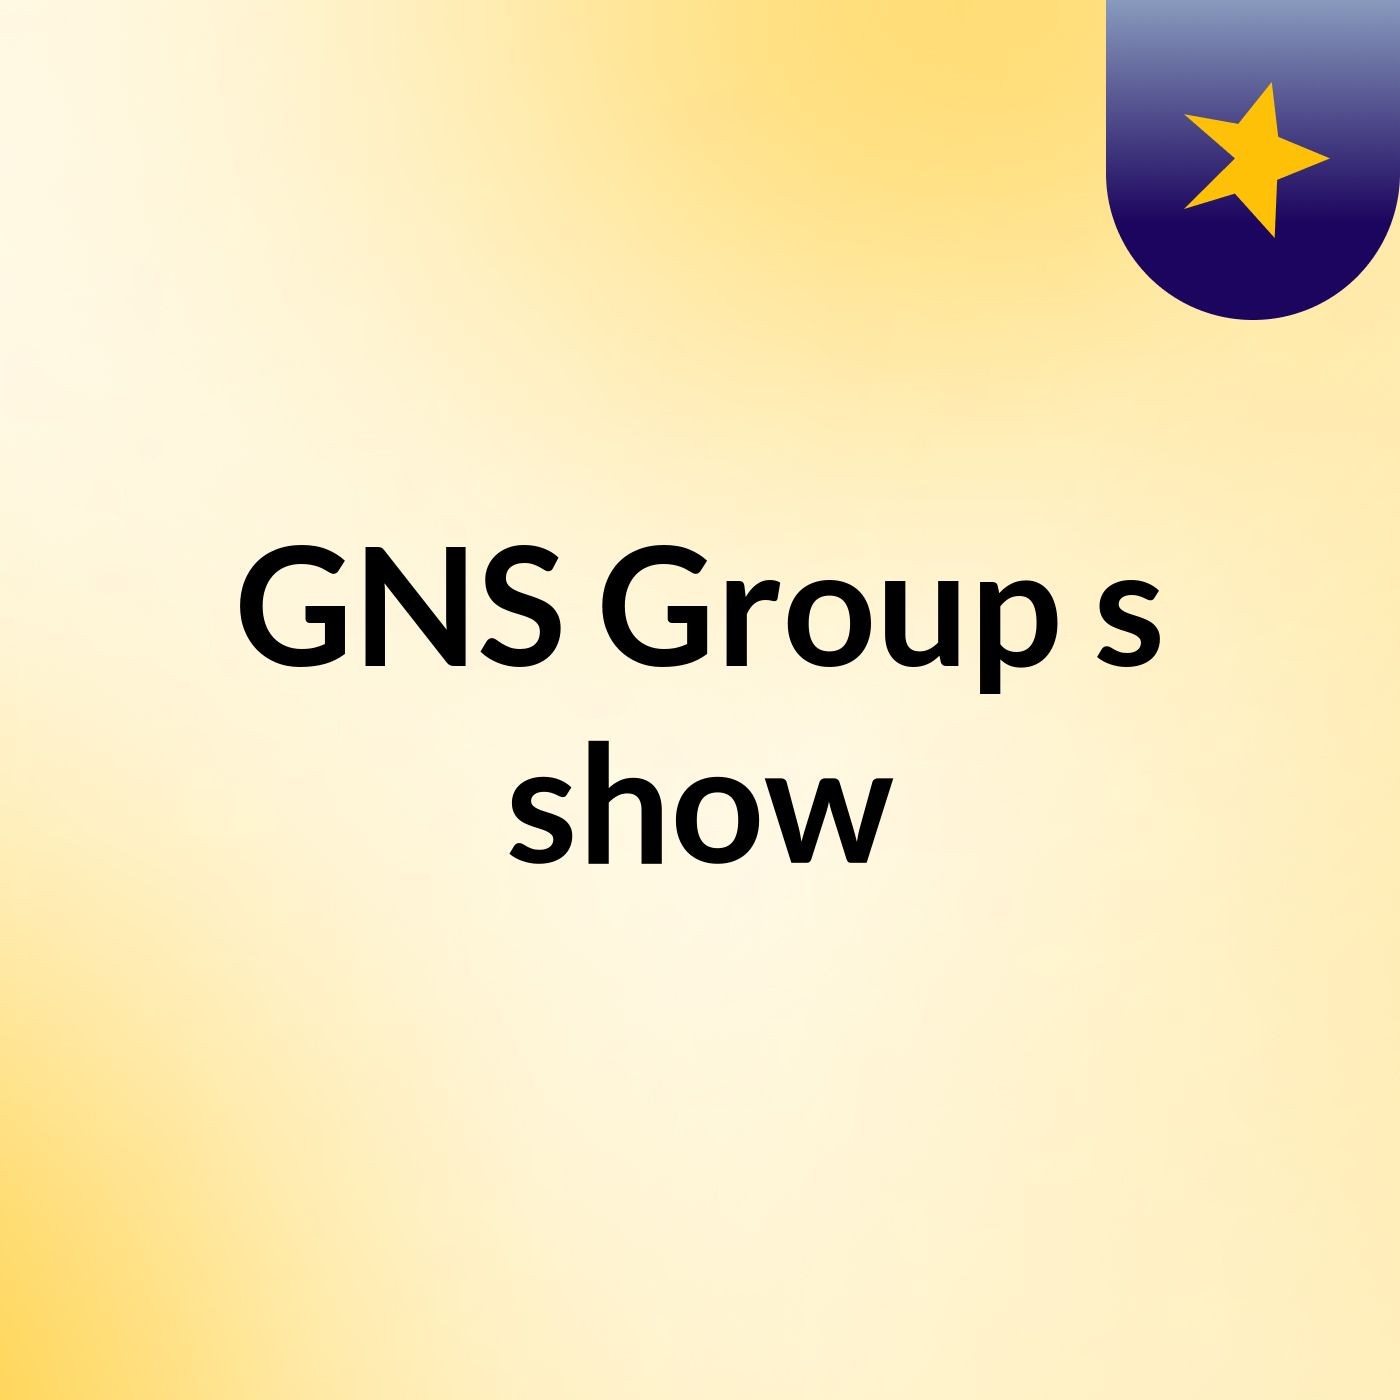 GNS Group's show